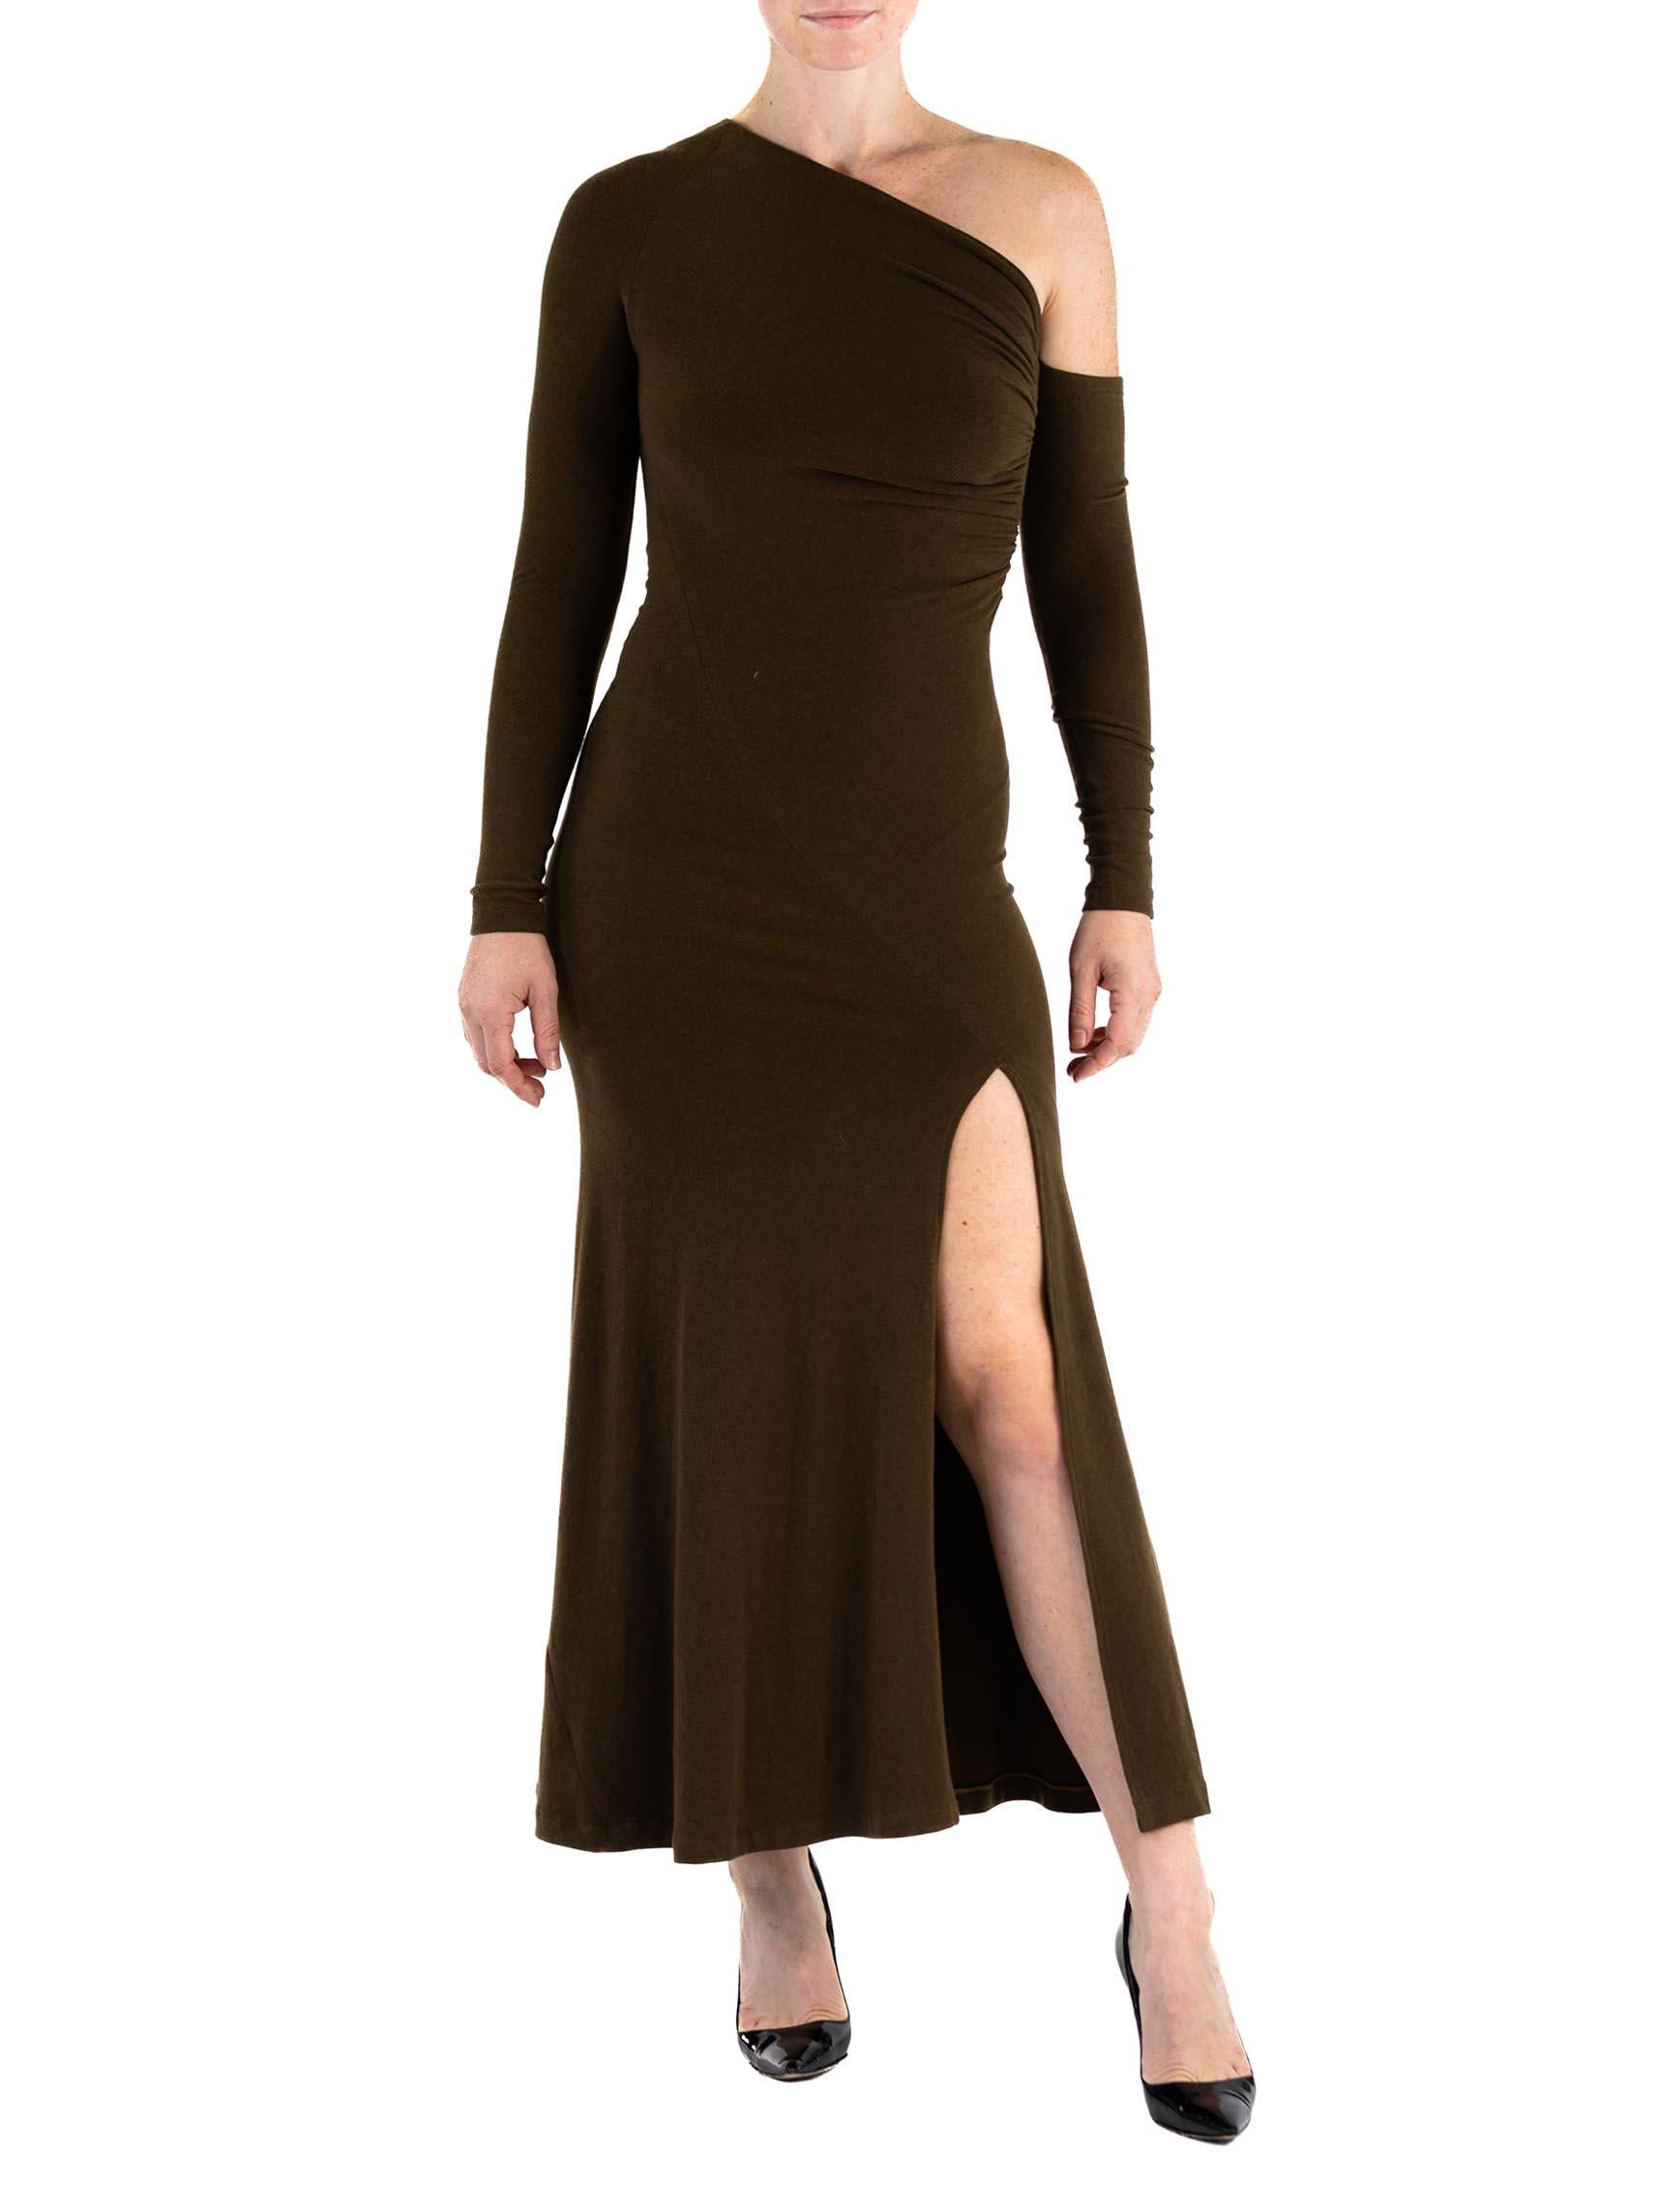 1990S DONNA KARAN Brown Rayon Blend Jersey Assymtetrical Neckline Ruched Gown W For Sale 1